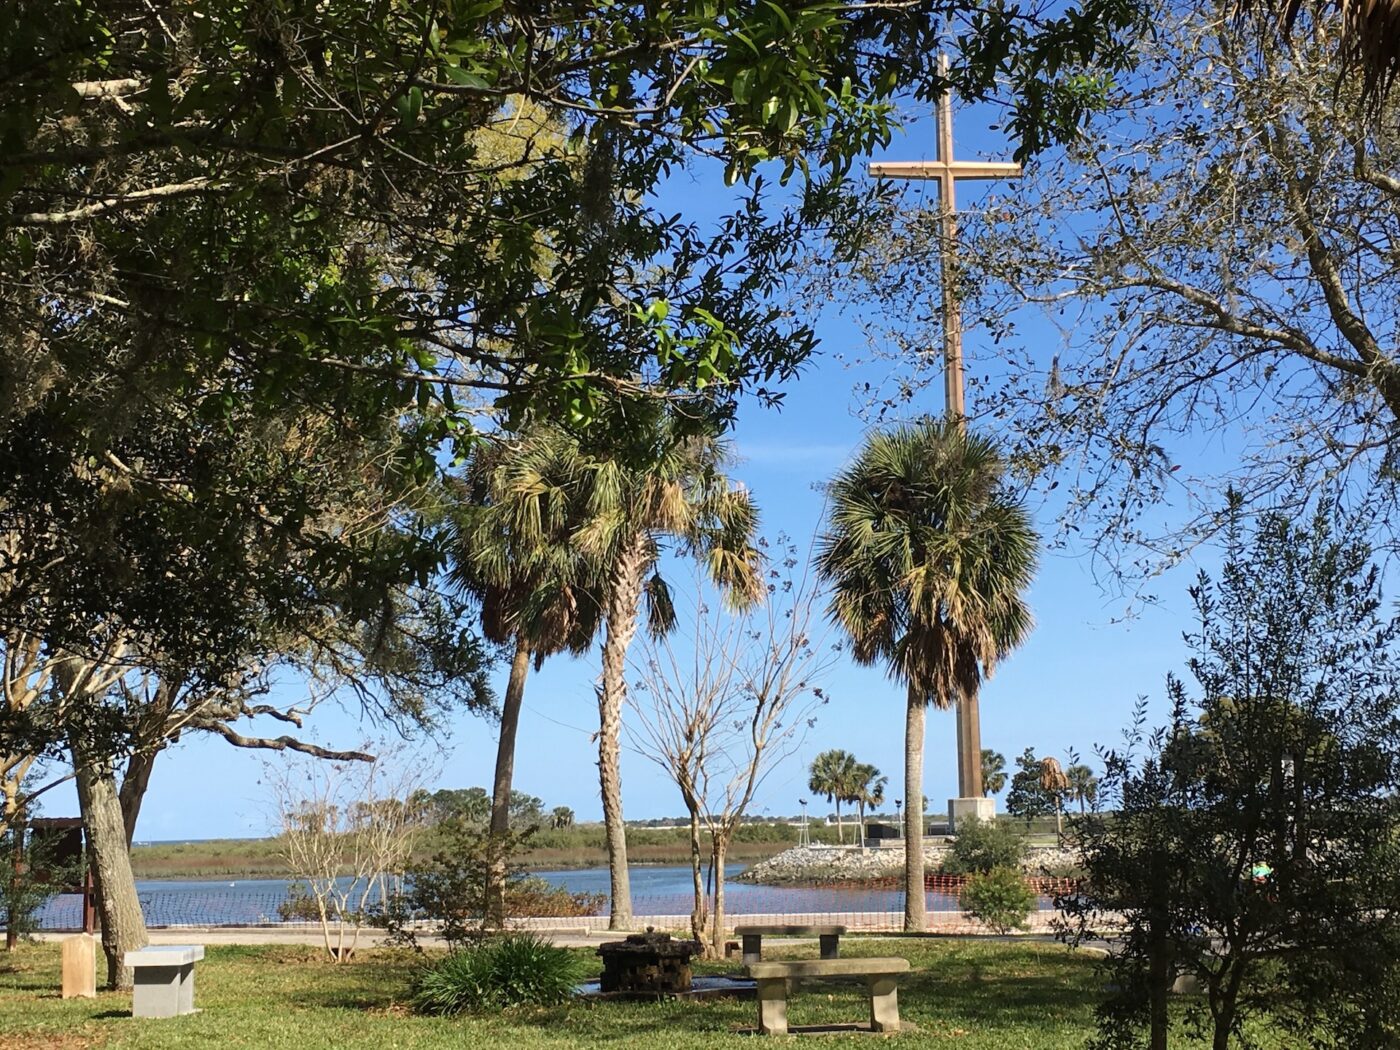 Pictured is a the 200' tall cross on the grounds of the Our Lady of La Leche Shrine in St. Augustine, Fllorida. Also in view is the ocean and palm trees.